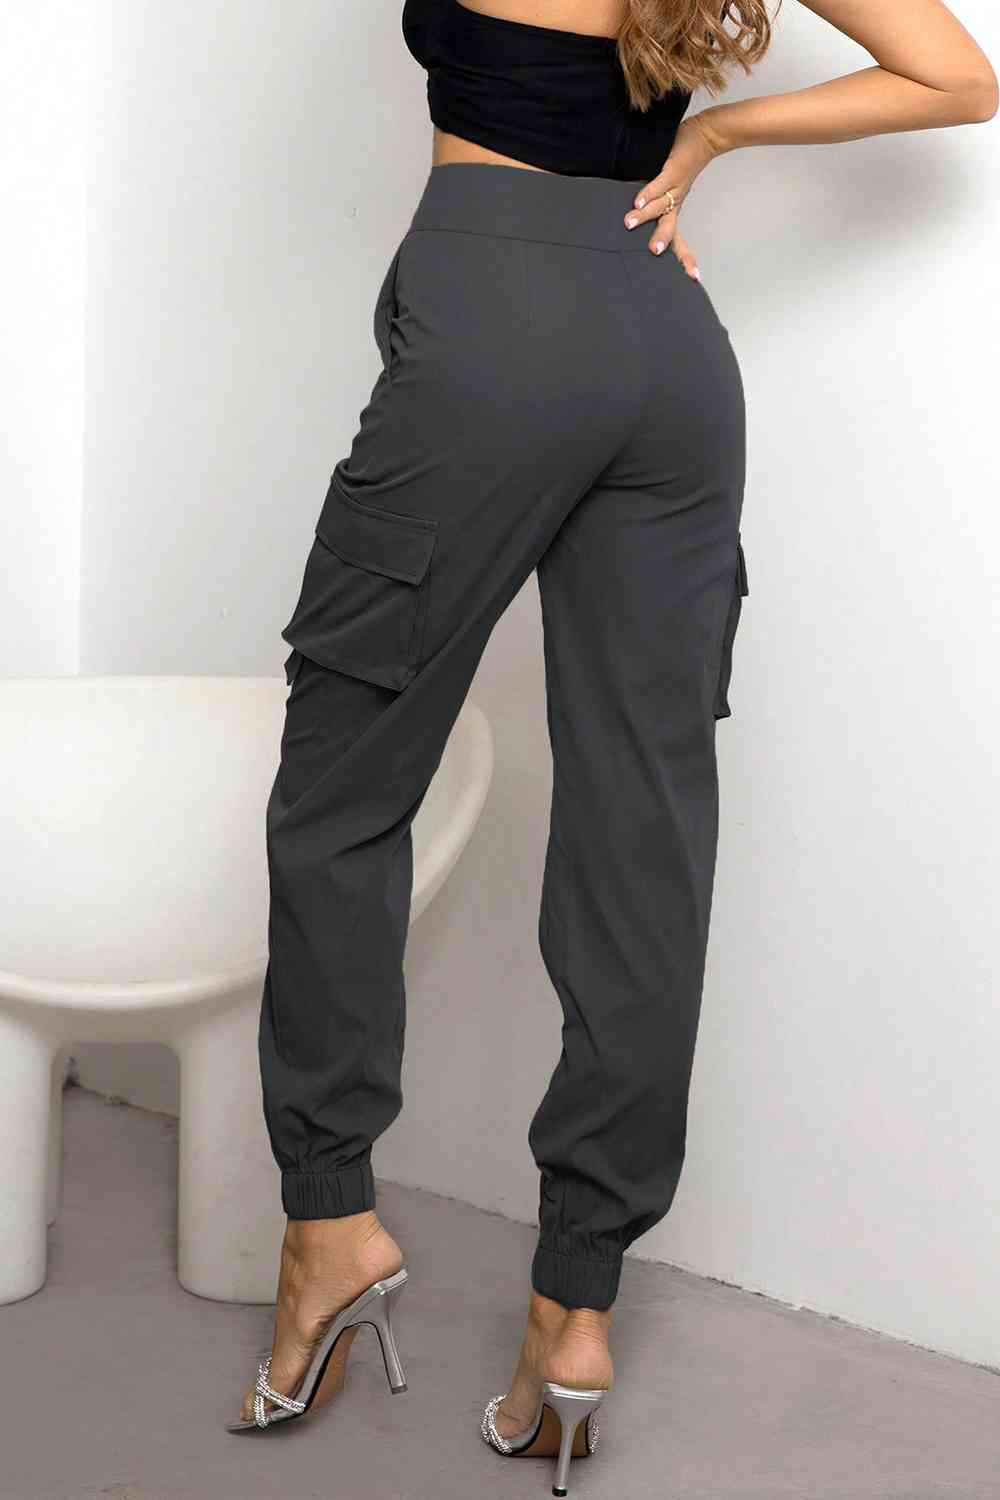 Back View, High Waist Cargo Pants In Charcoal